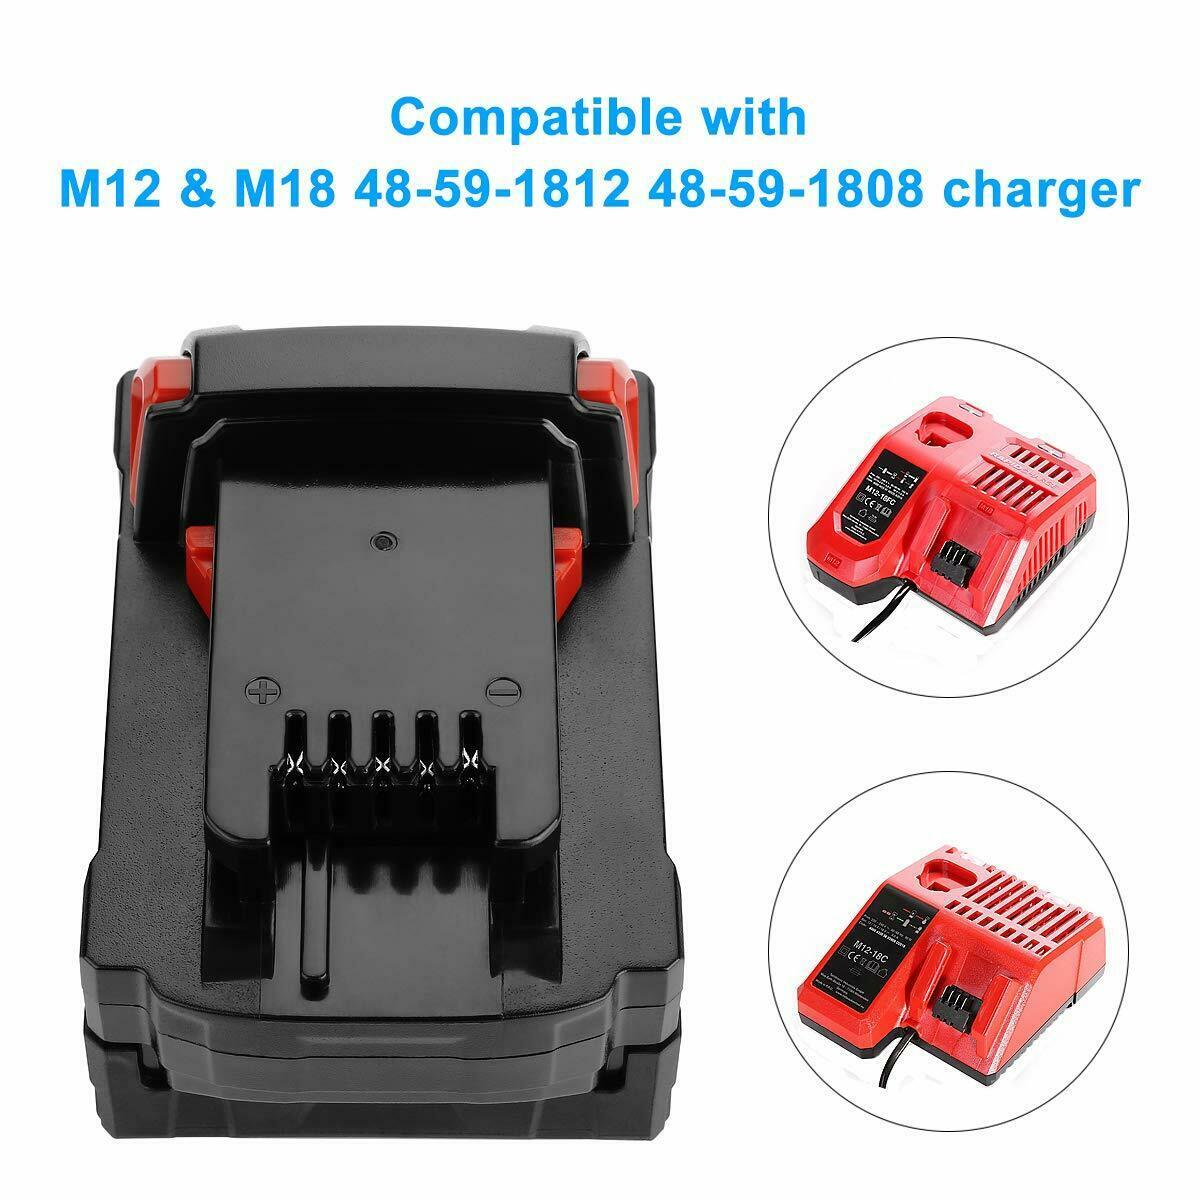 2 Pack For Milwaukee M18 Lithium XC 5.0 AH Capacity Battery - Etyn Online {{ product_tag }}